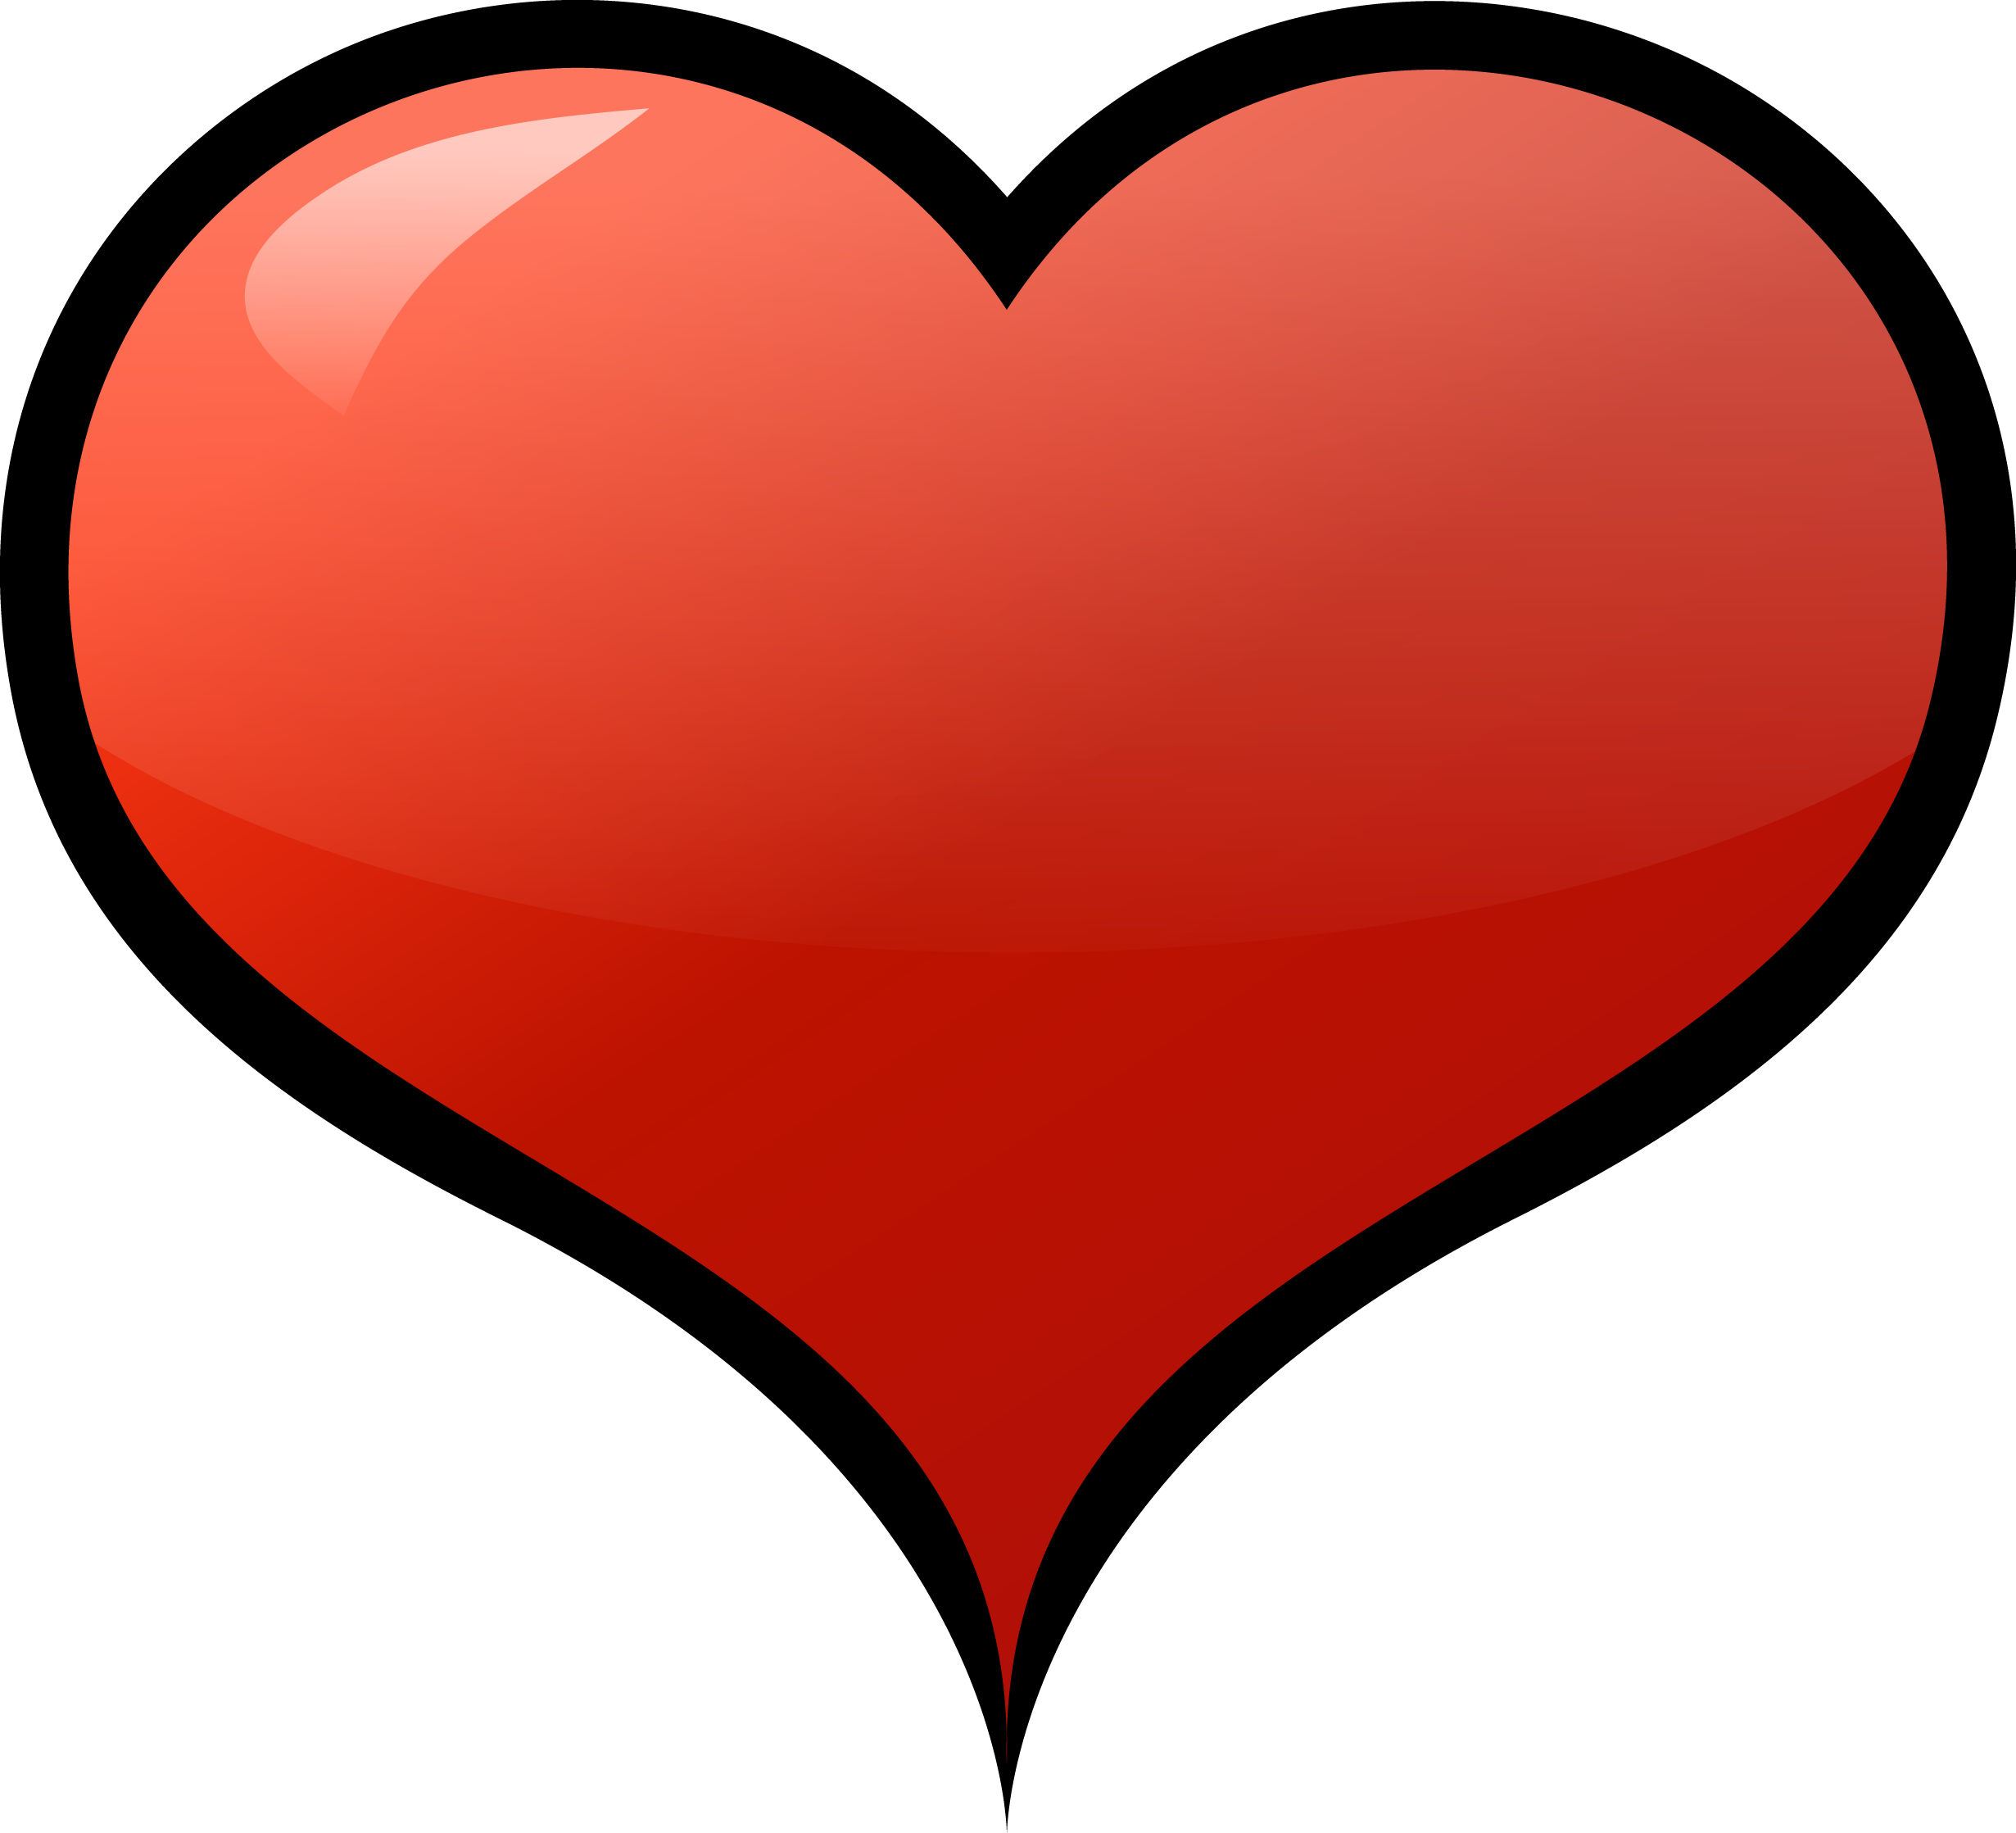 Heart February Day 14 Valentine'S Free HD Image Clipart